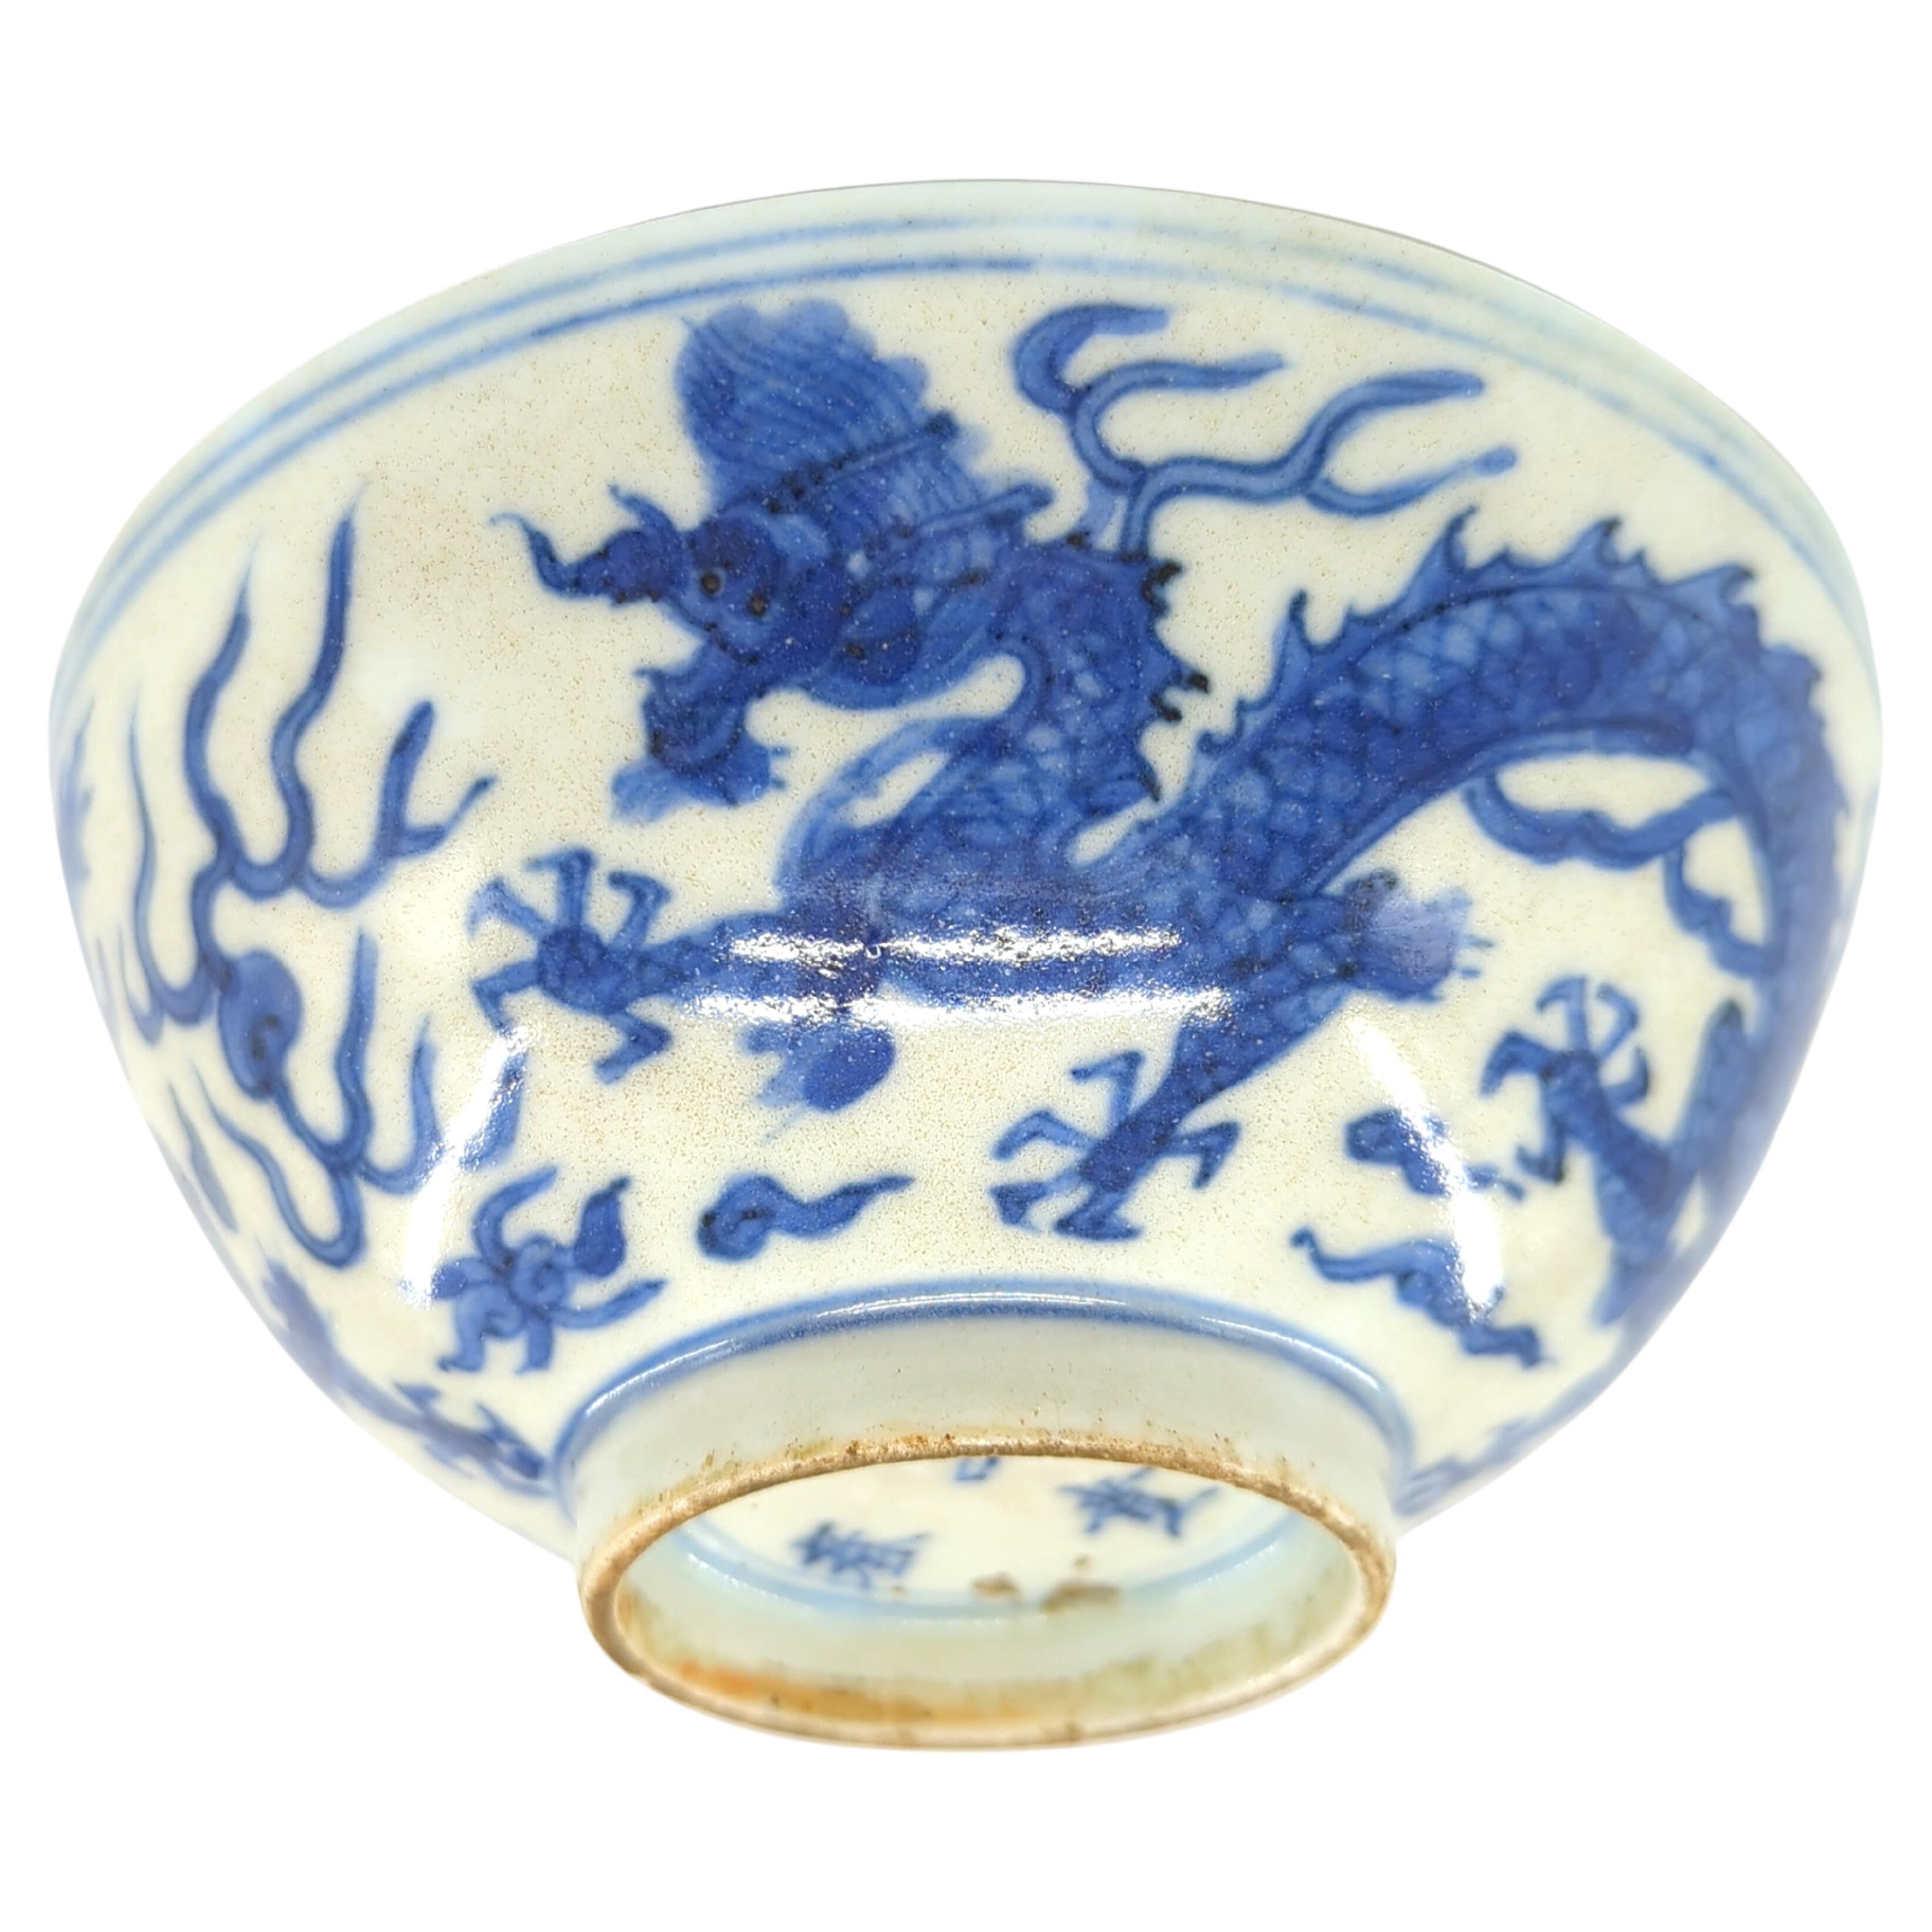 Antique Chinese Porcelain Blue&White Dragon Bowl Fu Gui Chang Chun Mark Ming 17c In Good Condition For Sale In Richmond, CA